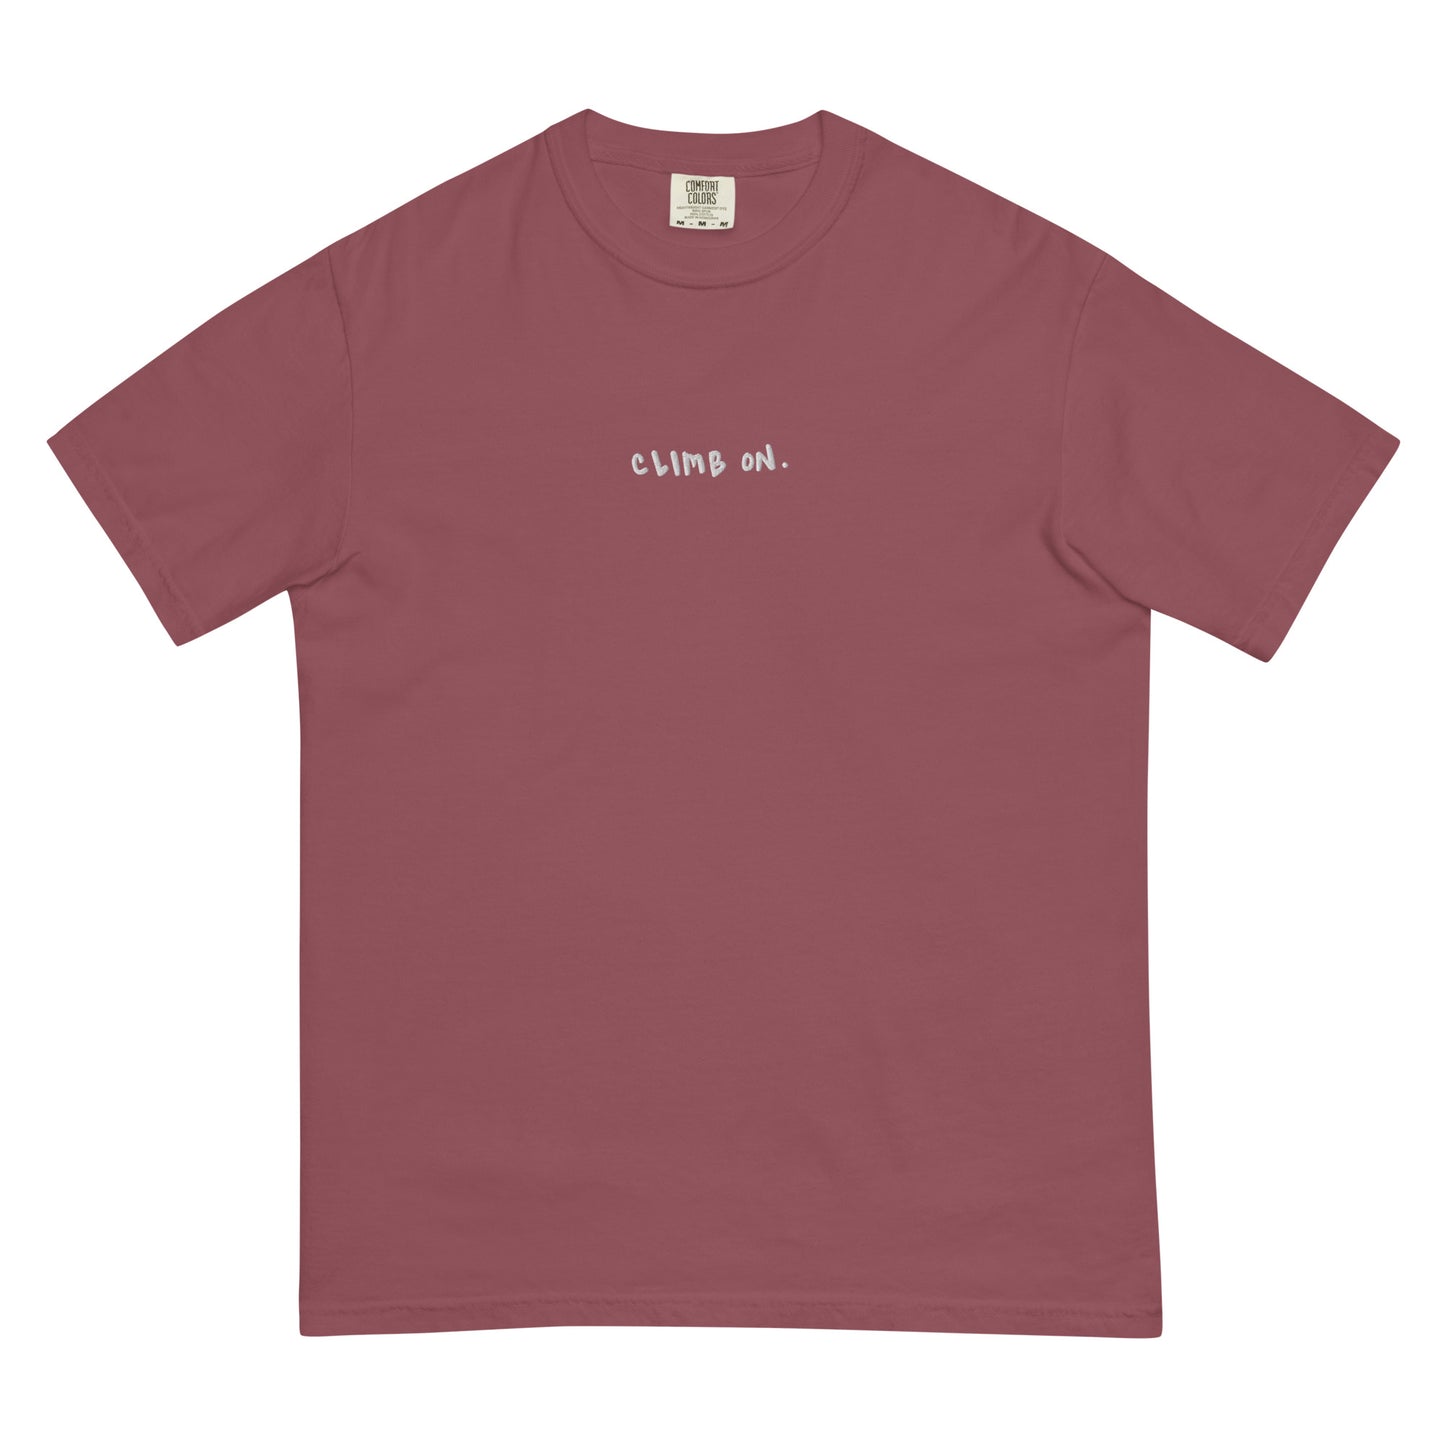 climb on embroidered garment-dyed heavyweight t-shirt